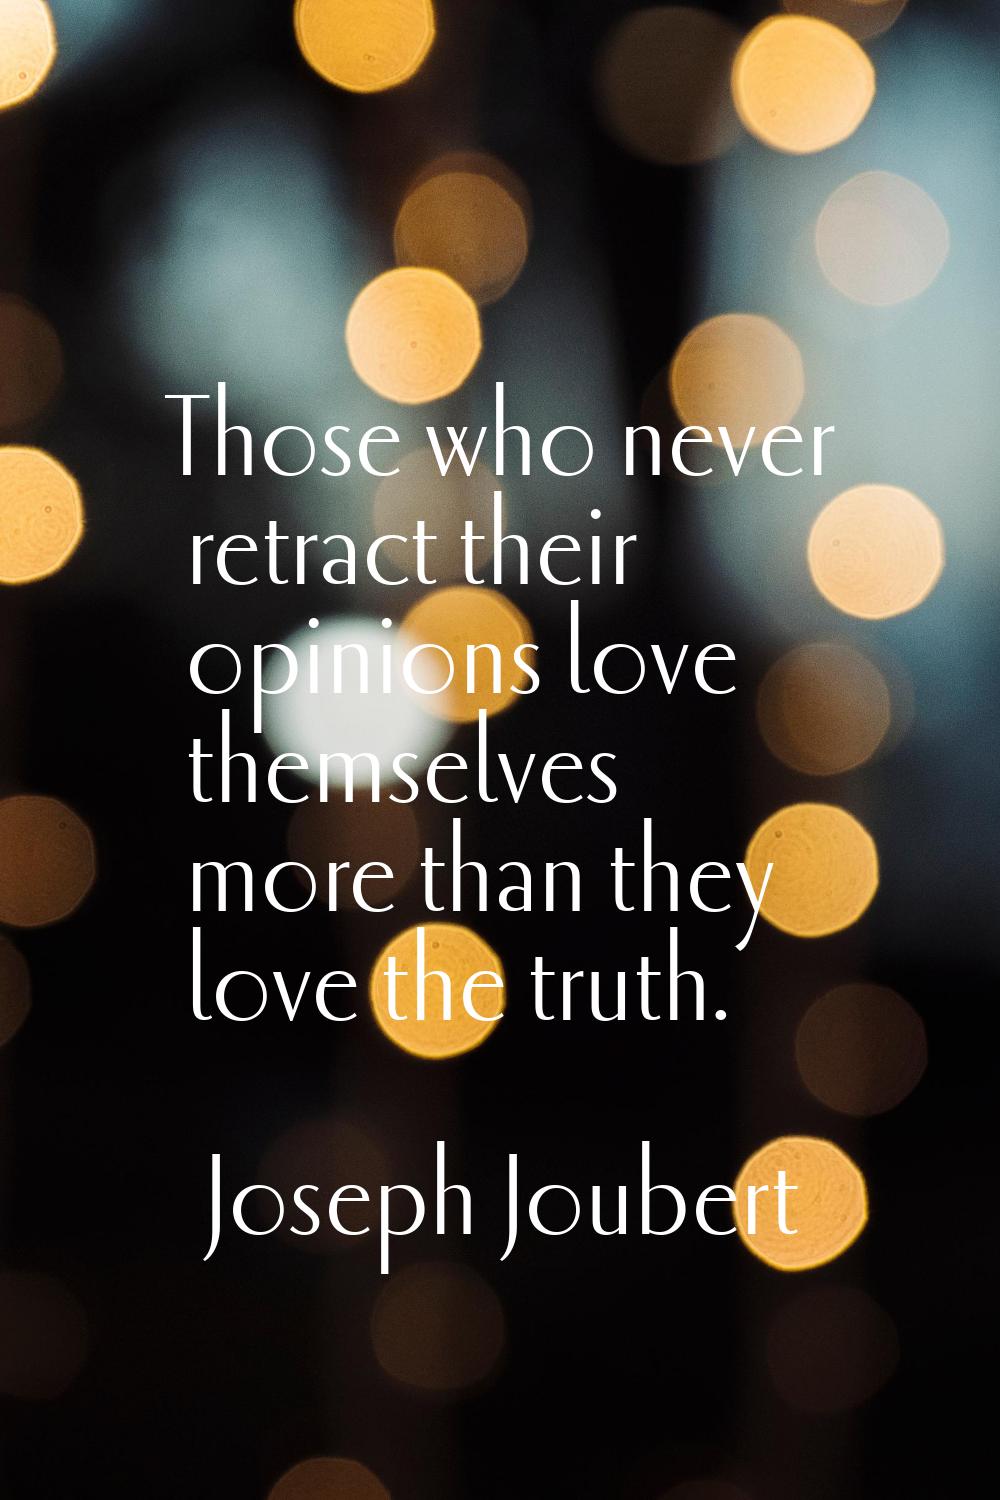 Those who never retract their opinions love themselves more than they love the truth.